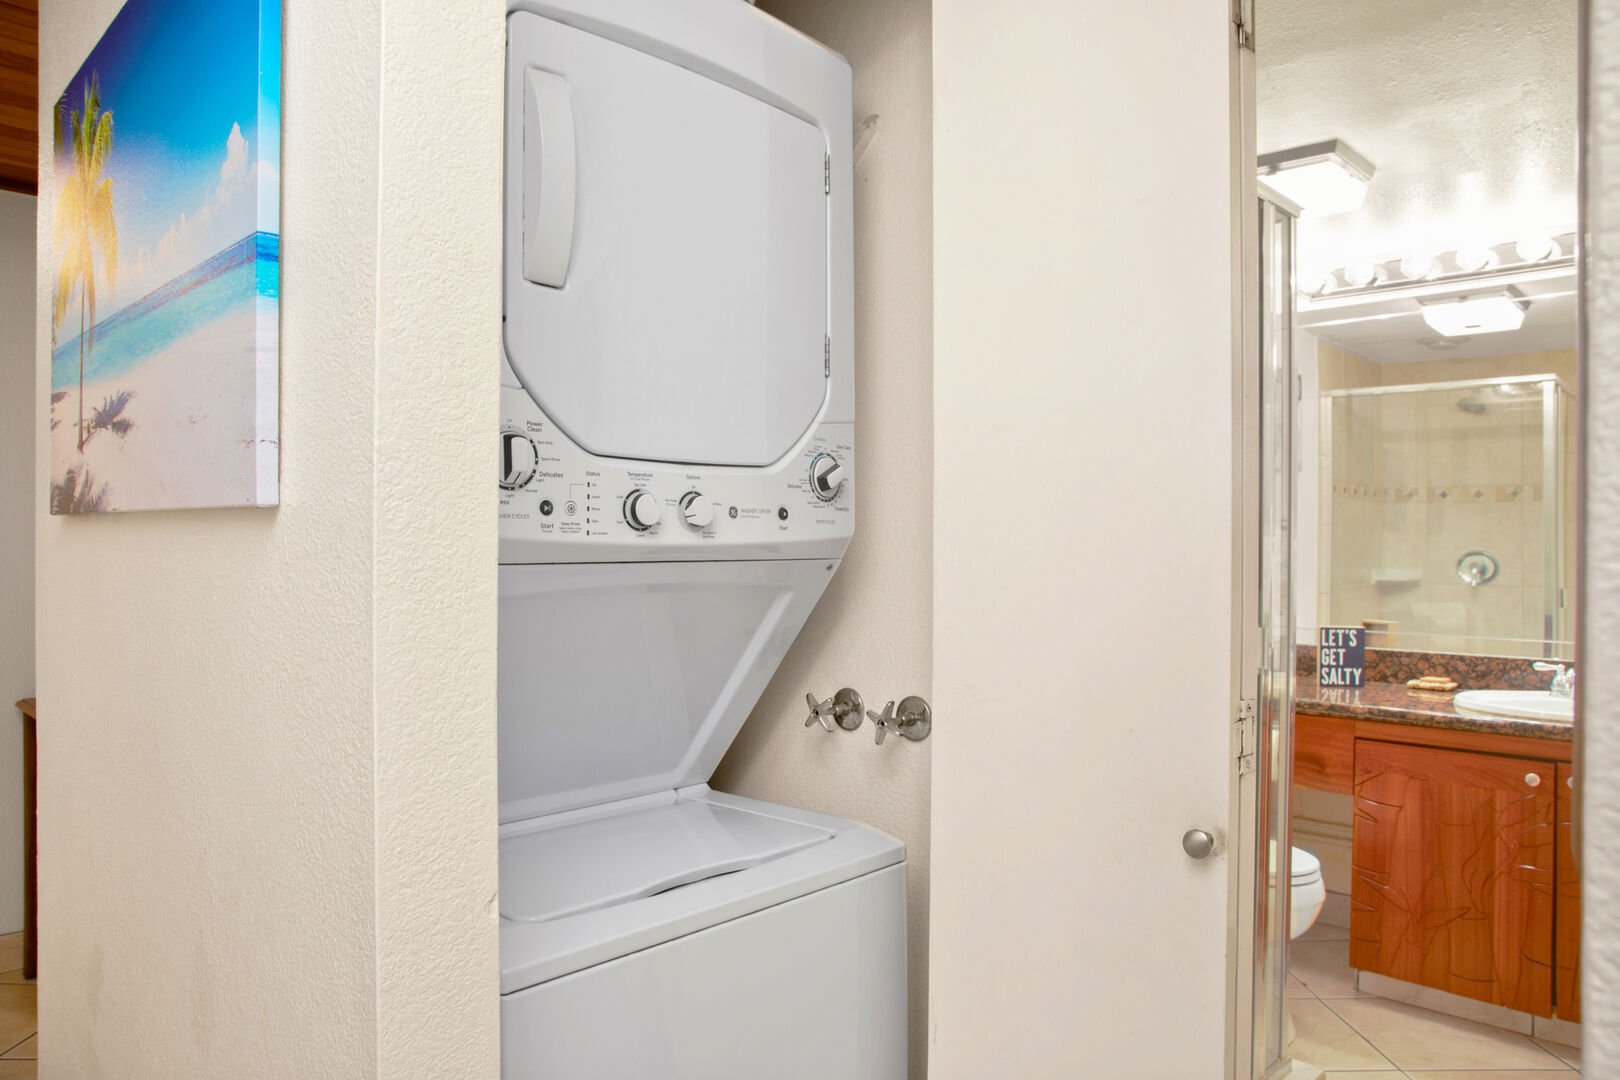 For your laundry needs, there is a washer and dryer available in the unit!